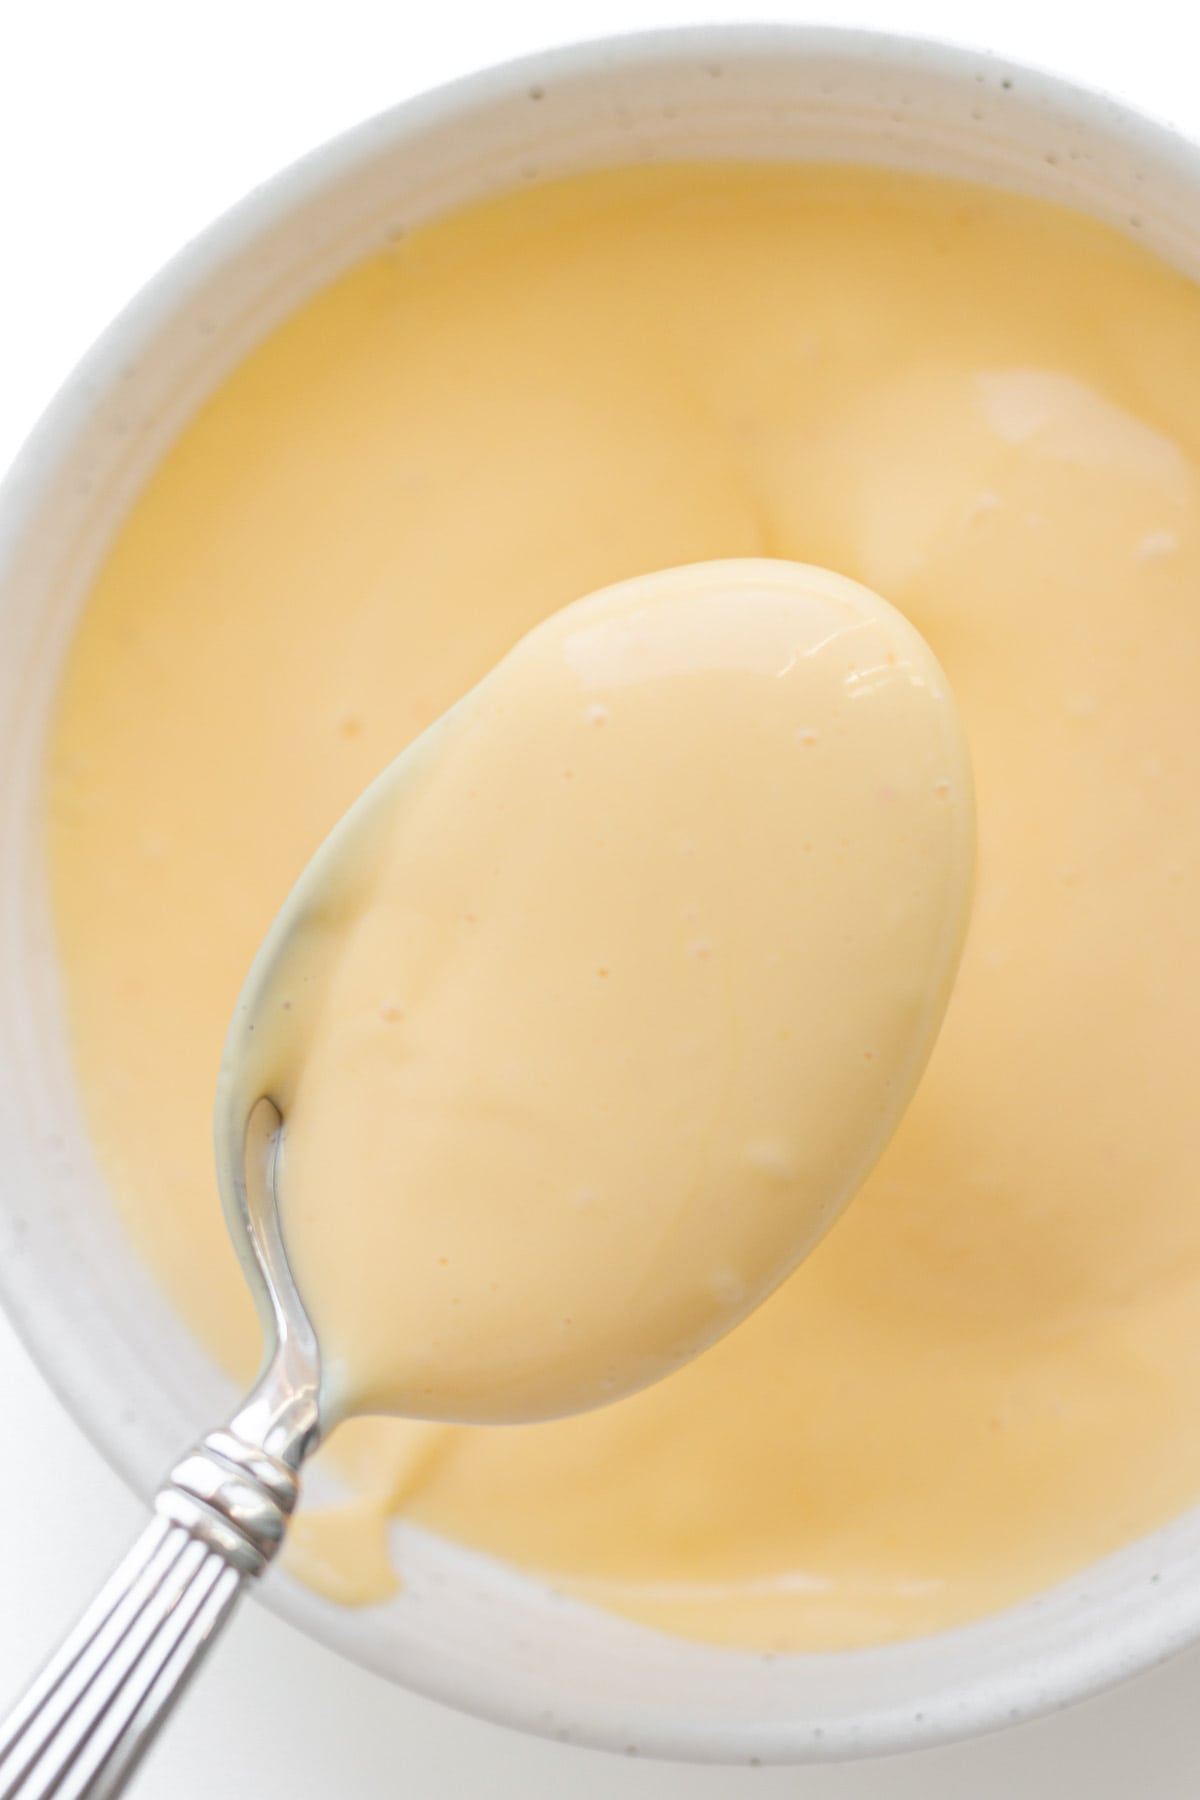 Spoonful of hollandaise sauce lifted over bowl.